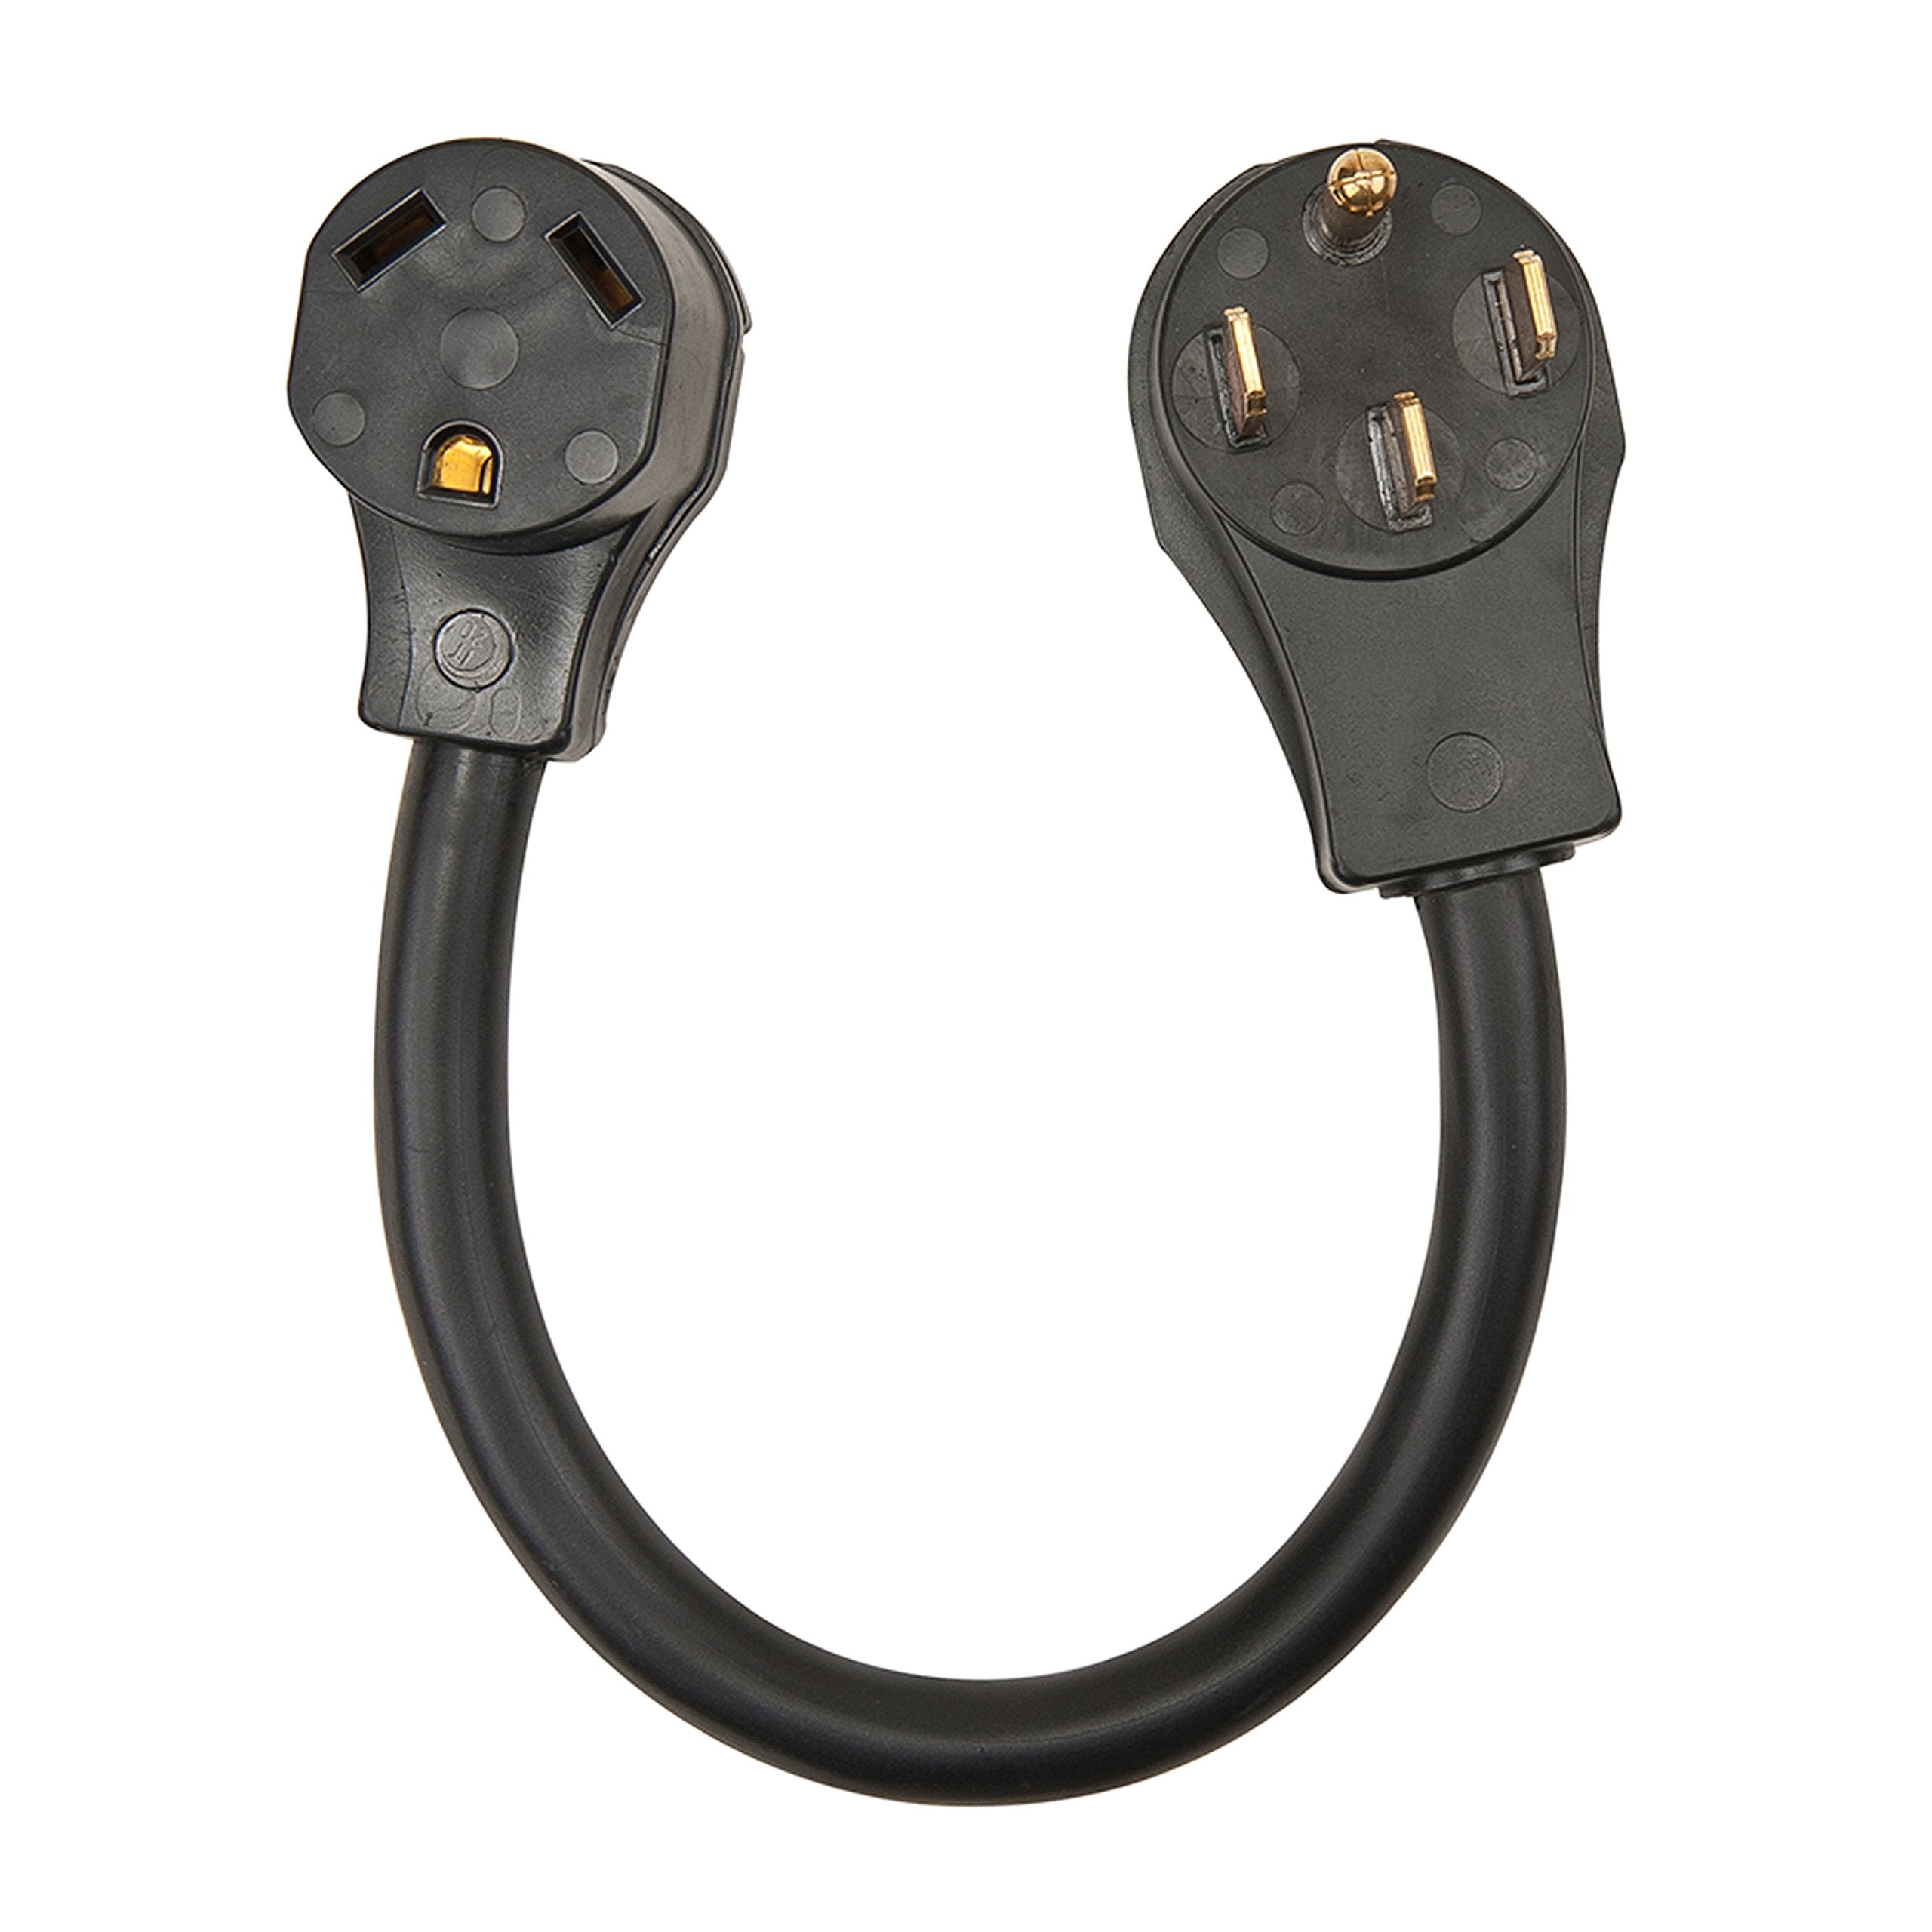 Surge Guard 30AM15AF12 RV Power Cord Adapter - 30 Amp Male 15 Amp Female, 12"